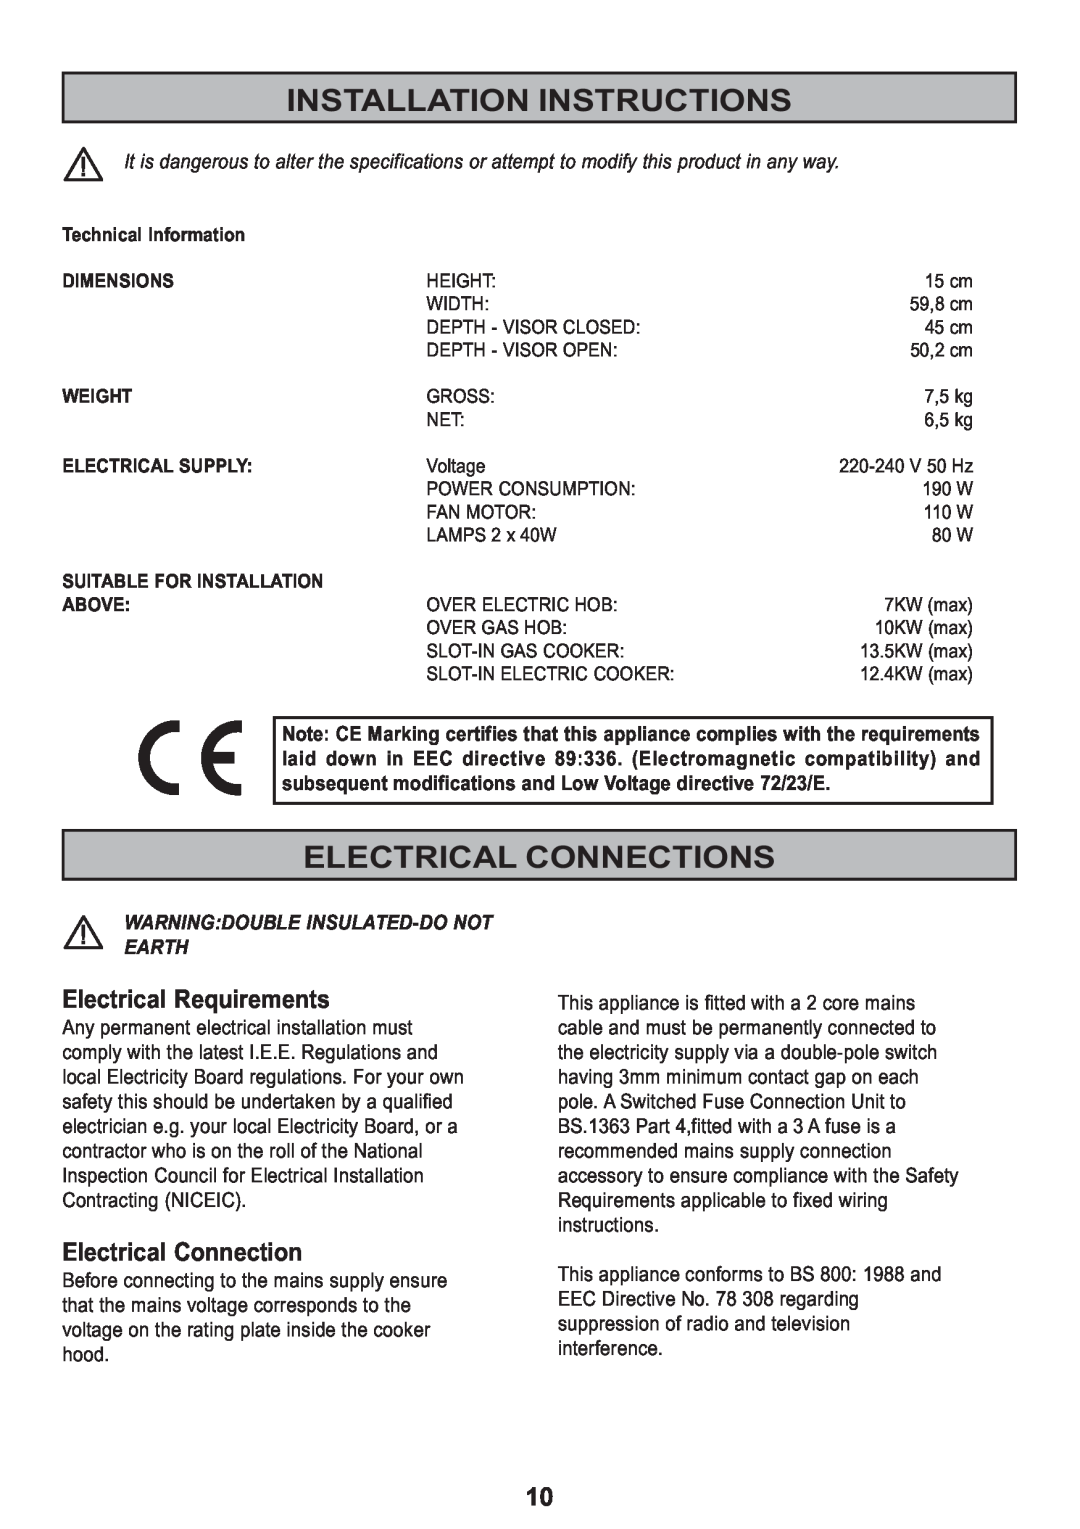 Zanussi ZHT 610 manual Installation Instructions, Electrical Connections, Electrical Requirements 